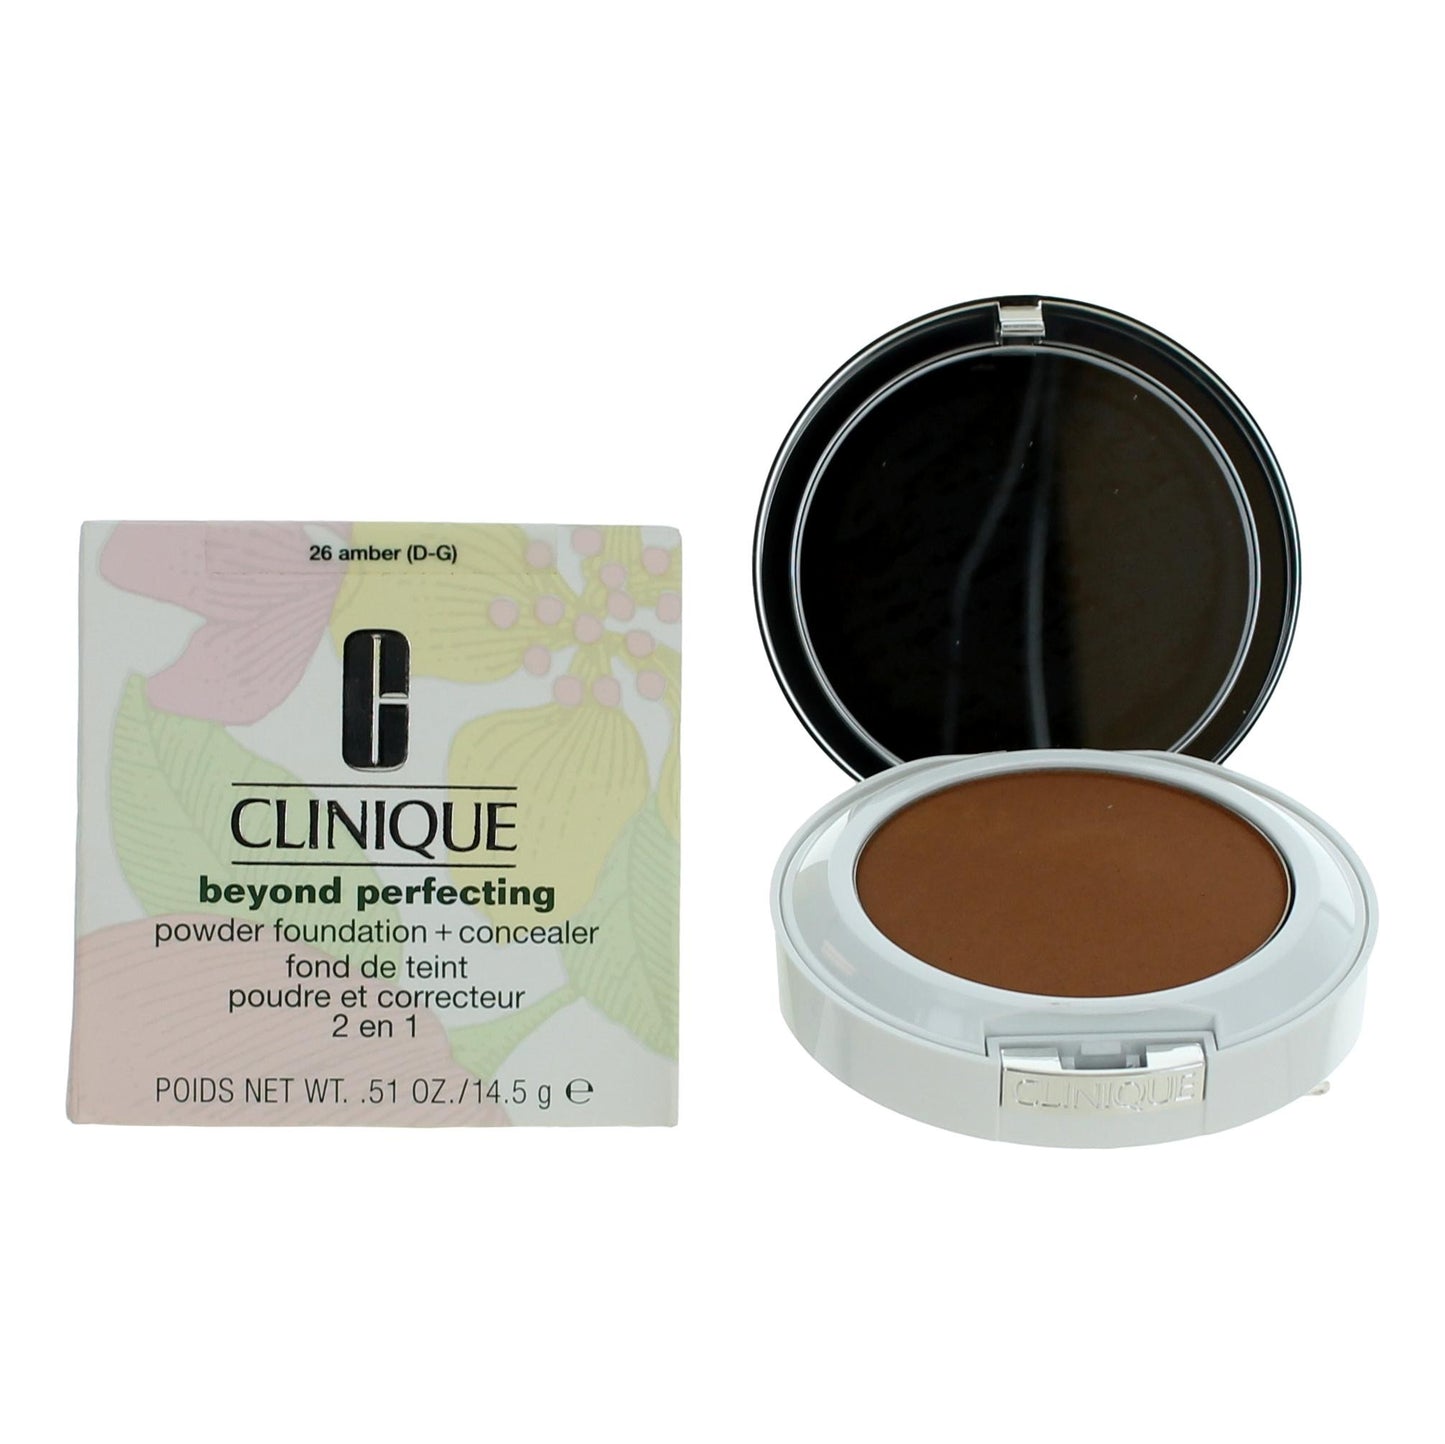 Clinique Beyond Perfecting, .51oz Powder Foundation + Concealer - 26 Amber - 26 Amber